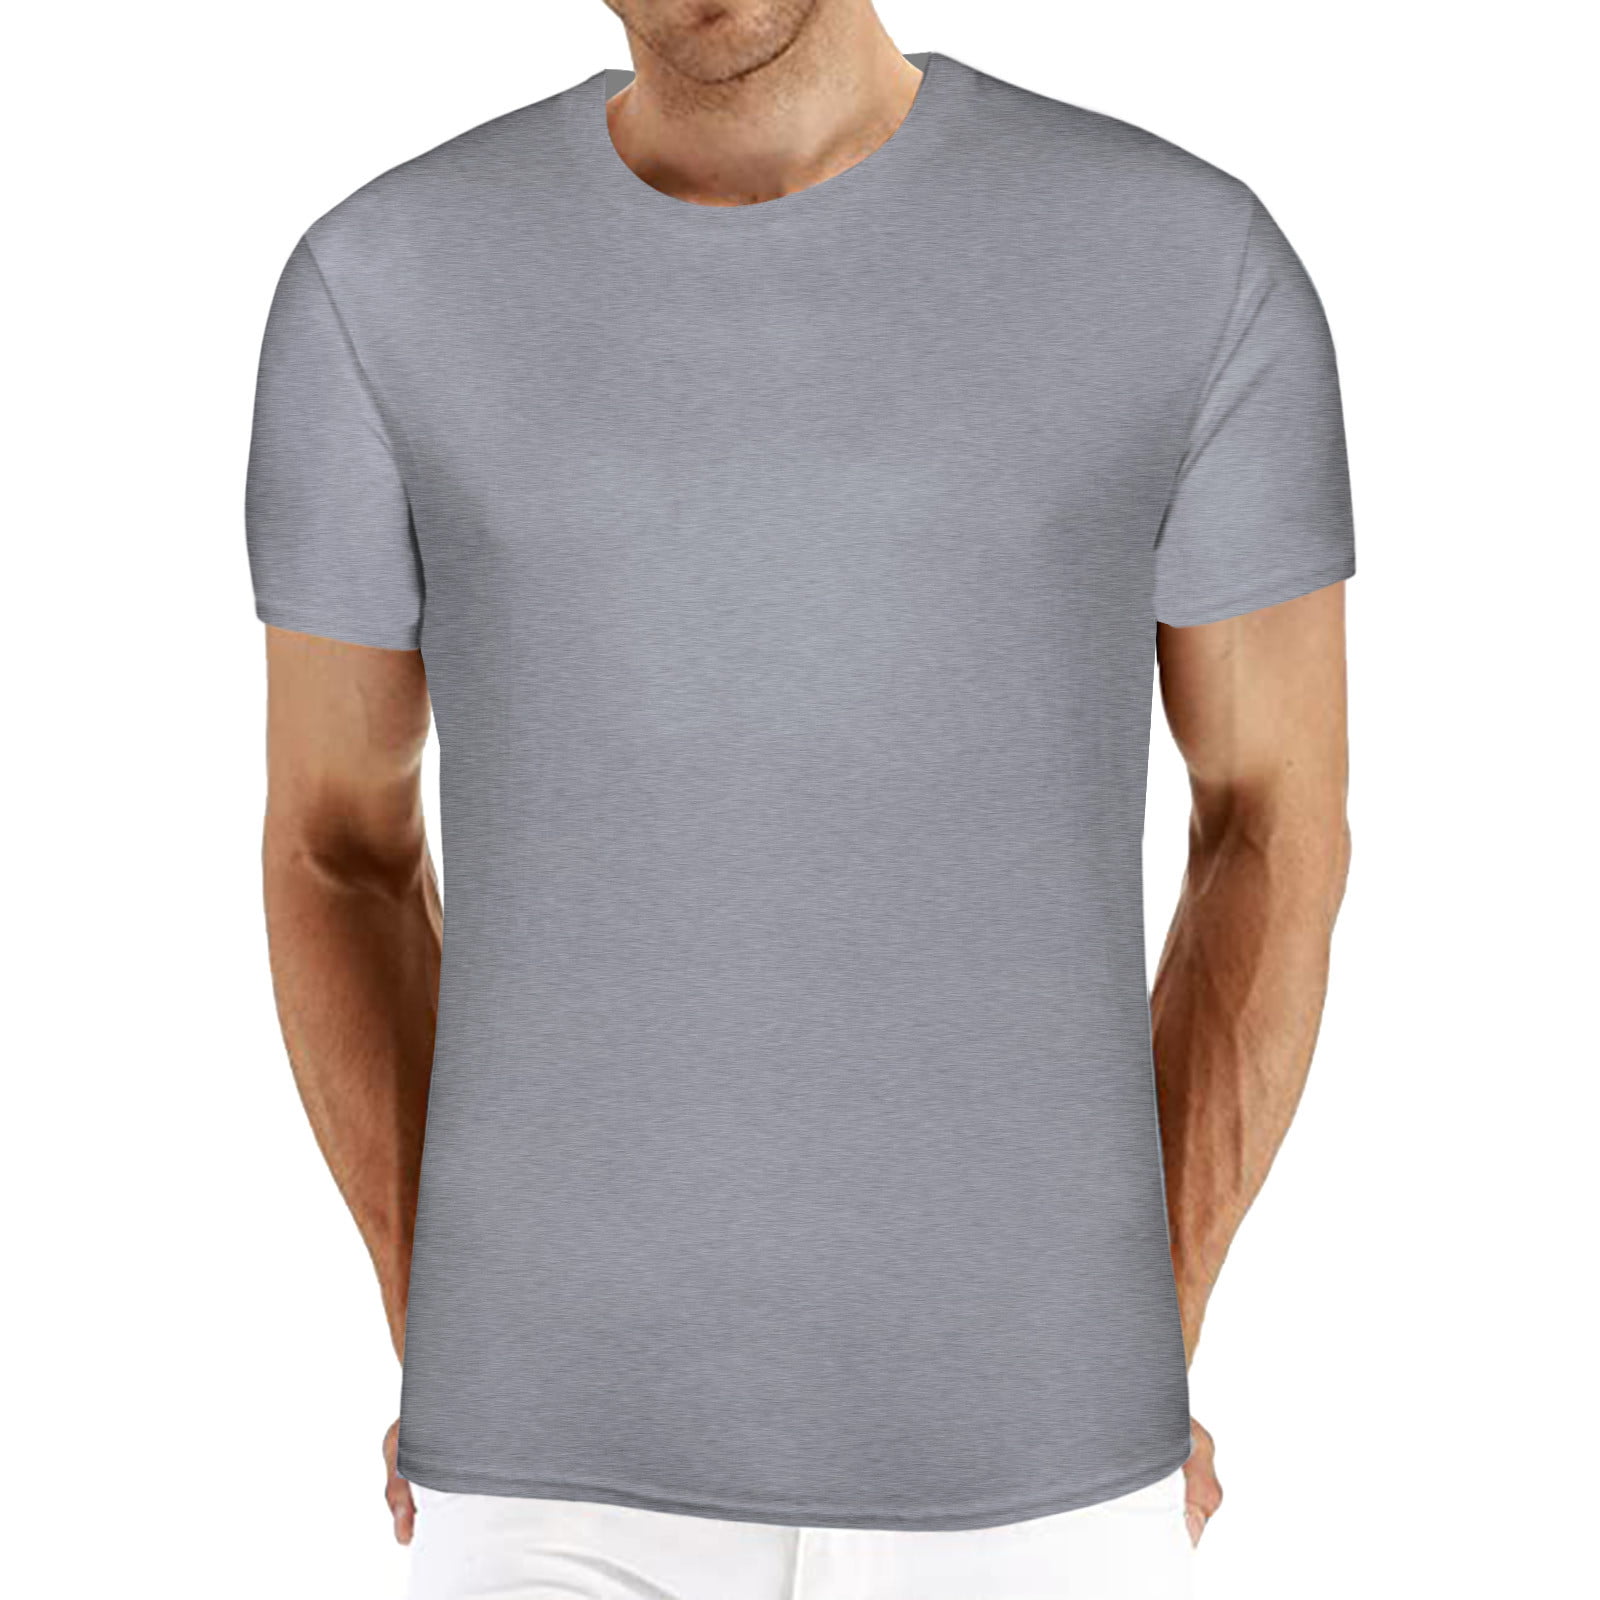 adviicd White V Neck T Shirts Mens Casual Tee Men's Triangle